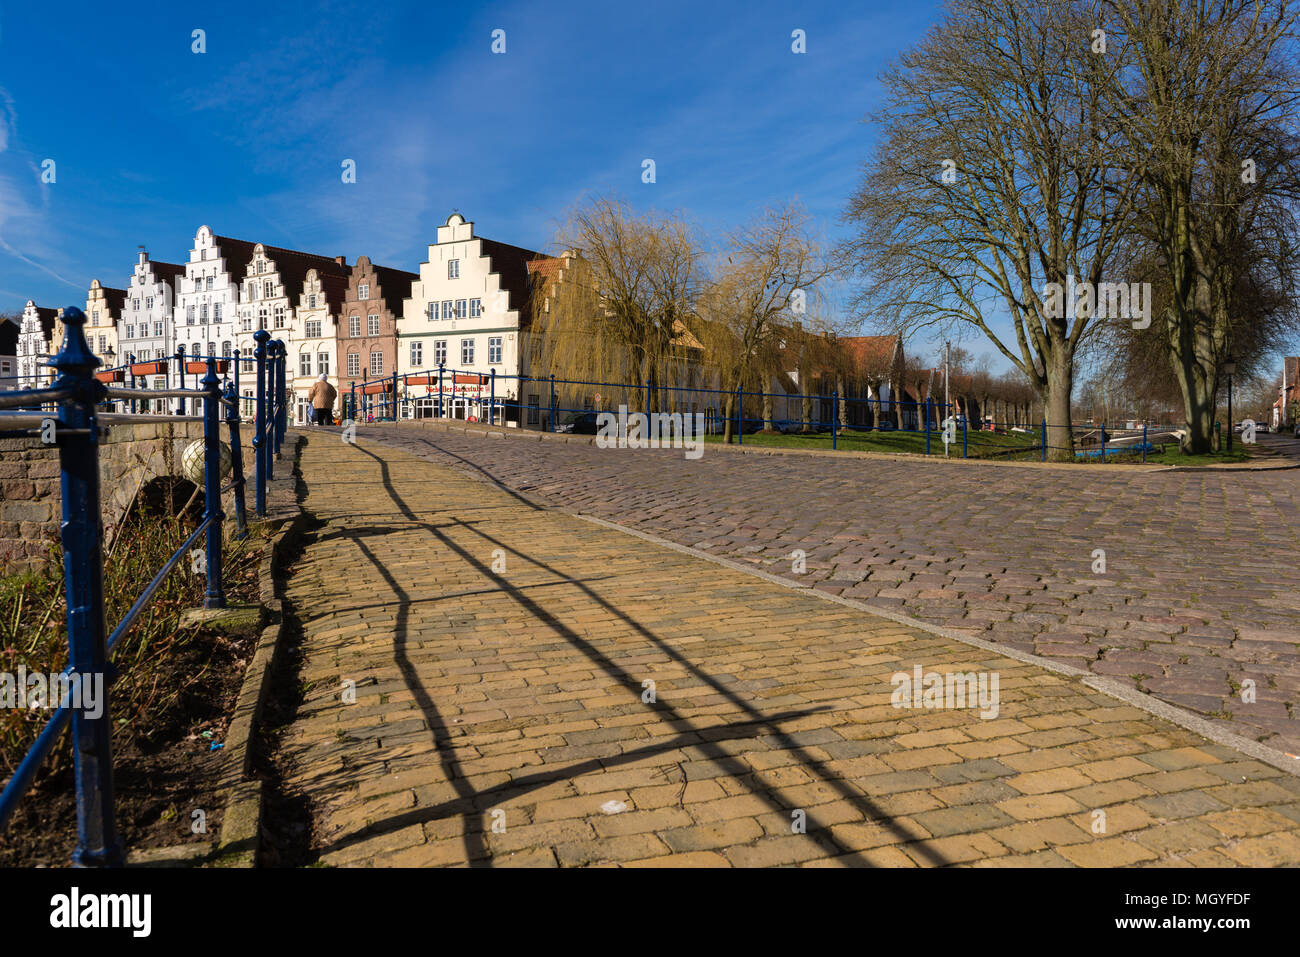 Gabled houses on the market square in the so-called 'Dutch' town with its town canals, Friedrichstadt, Schleswig-Holstein, Germany, Europe Stock Photo